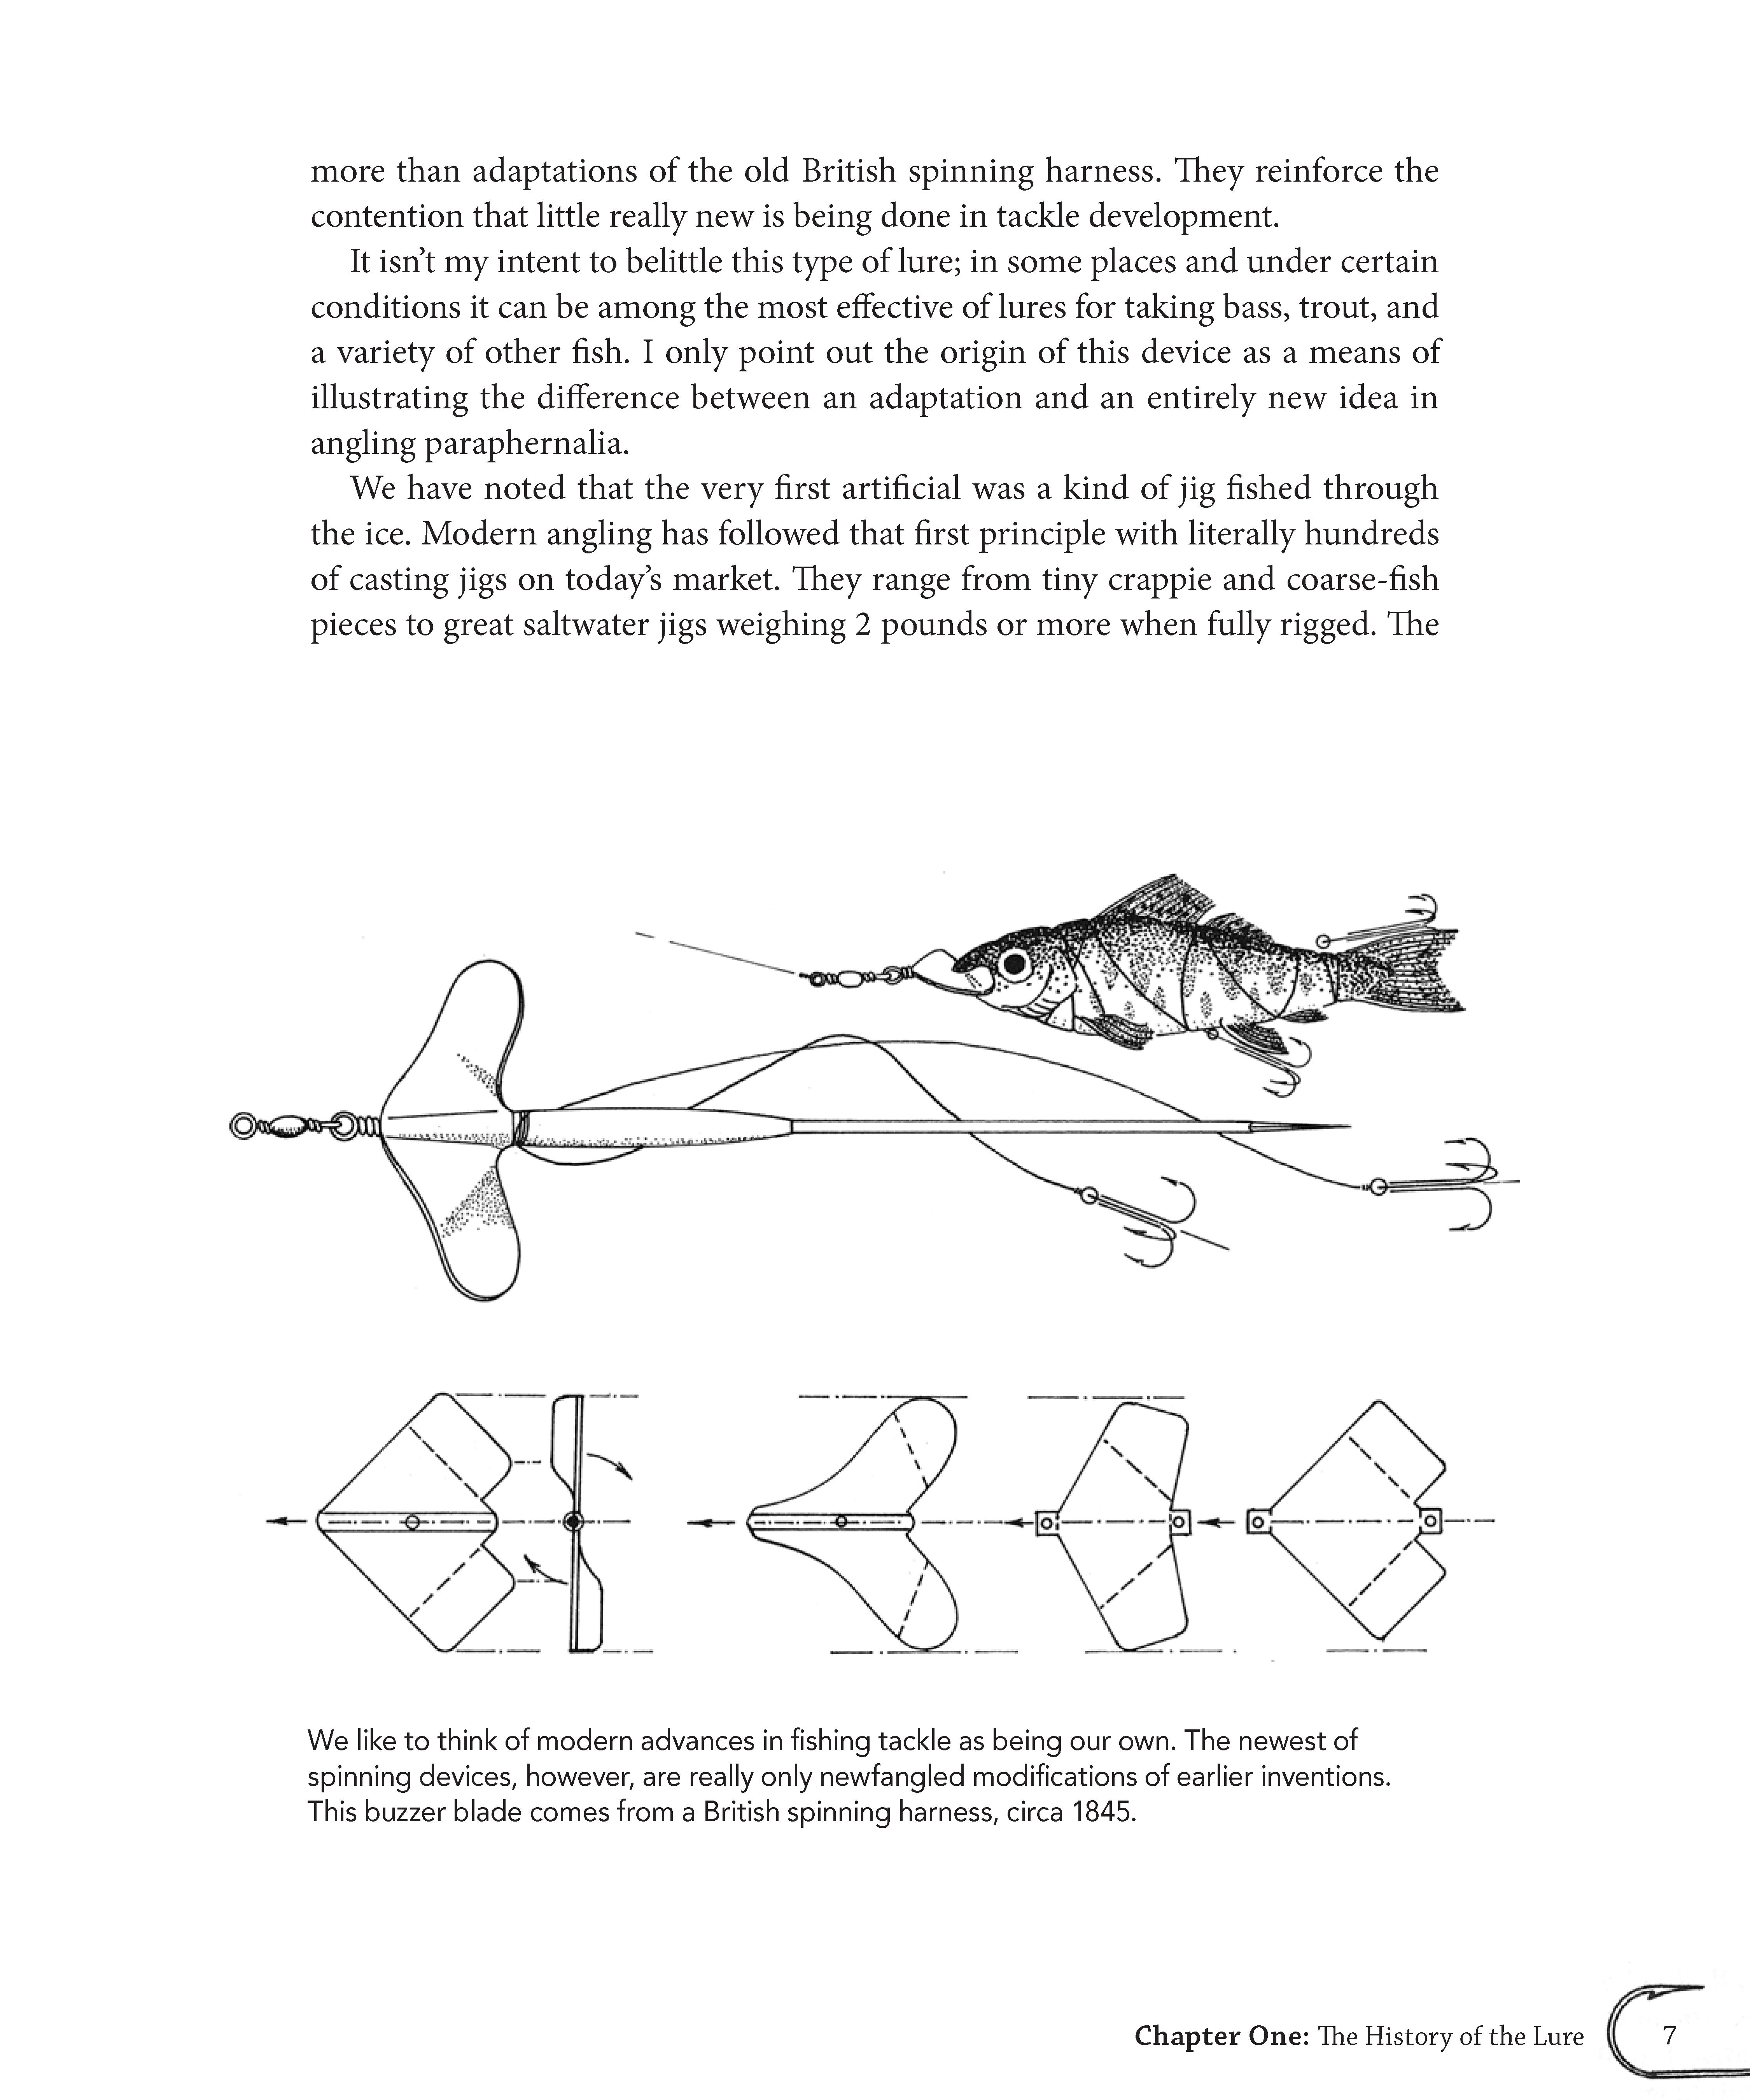 Book: Lurecraft Book How to Make Fishing Plugs, Spinners, Spoons, & Jigs DIY  Lures, Gift for Fisherman, Make You Own Fishing Lures 